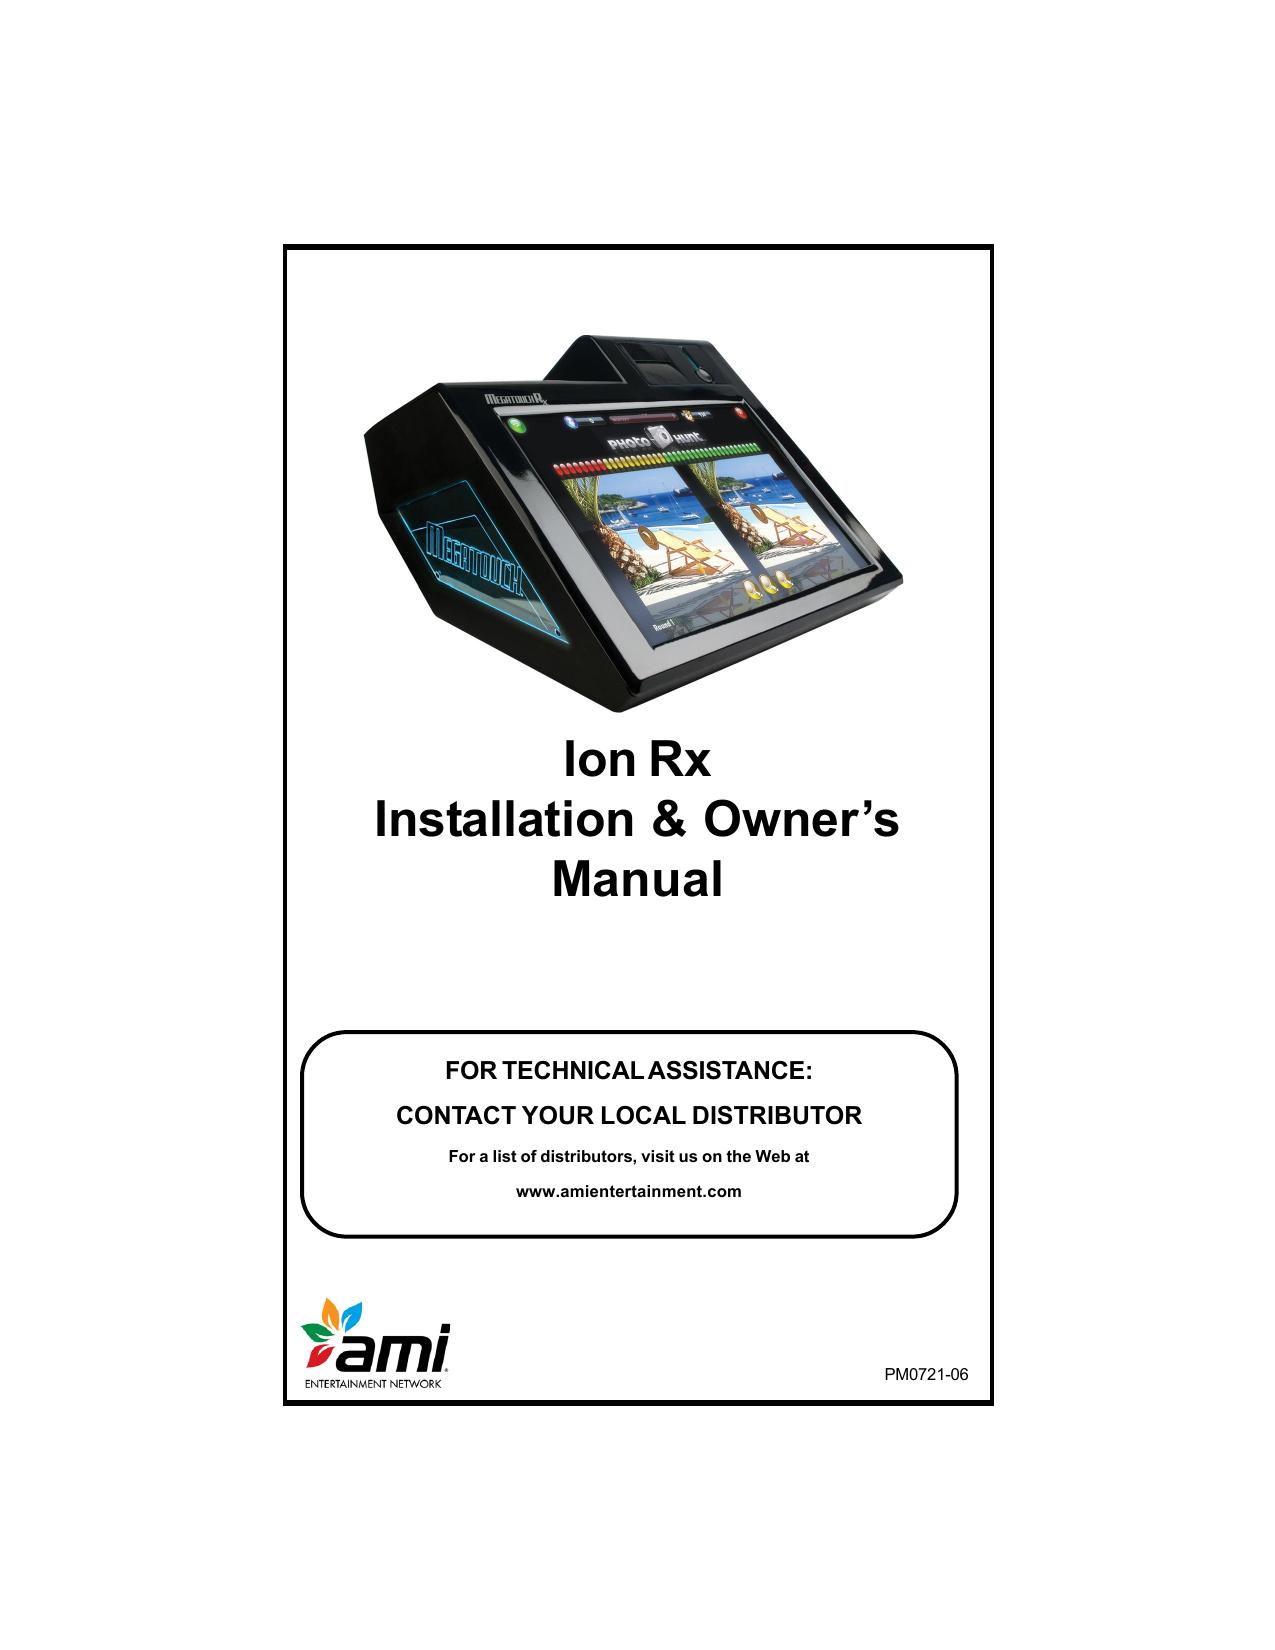 PM0721-06 Ion Rx owner's manual 2K10.5.pmd